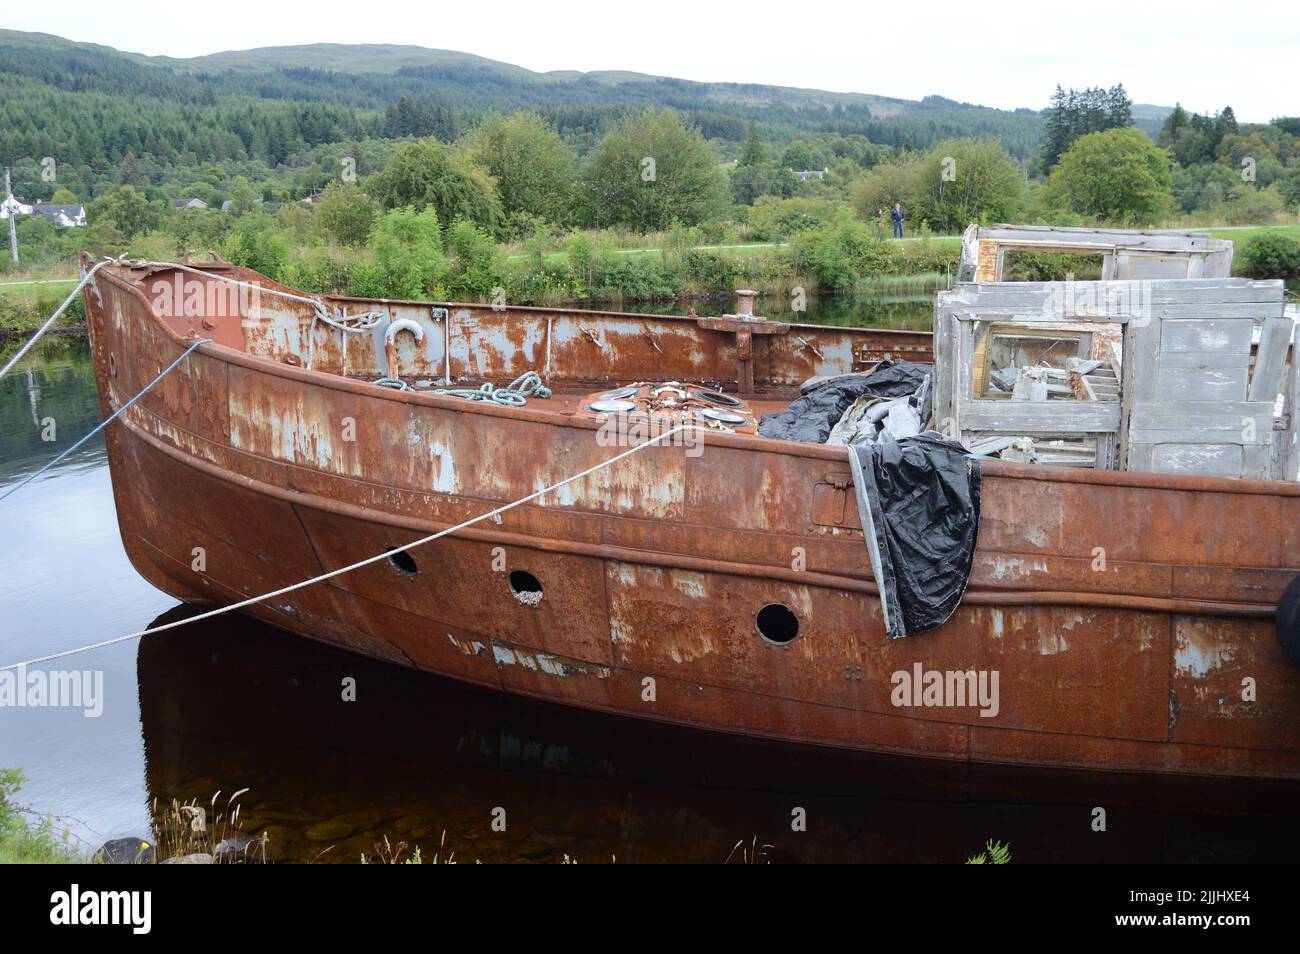 A boat that has seen better days on the Caledonian canal, Fort Augustus,, the rusting decay contrasting with the vibrancy of the surounding countrysid Stock Photo